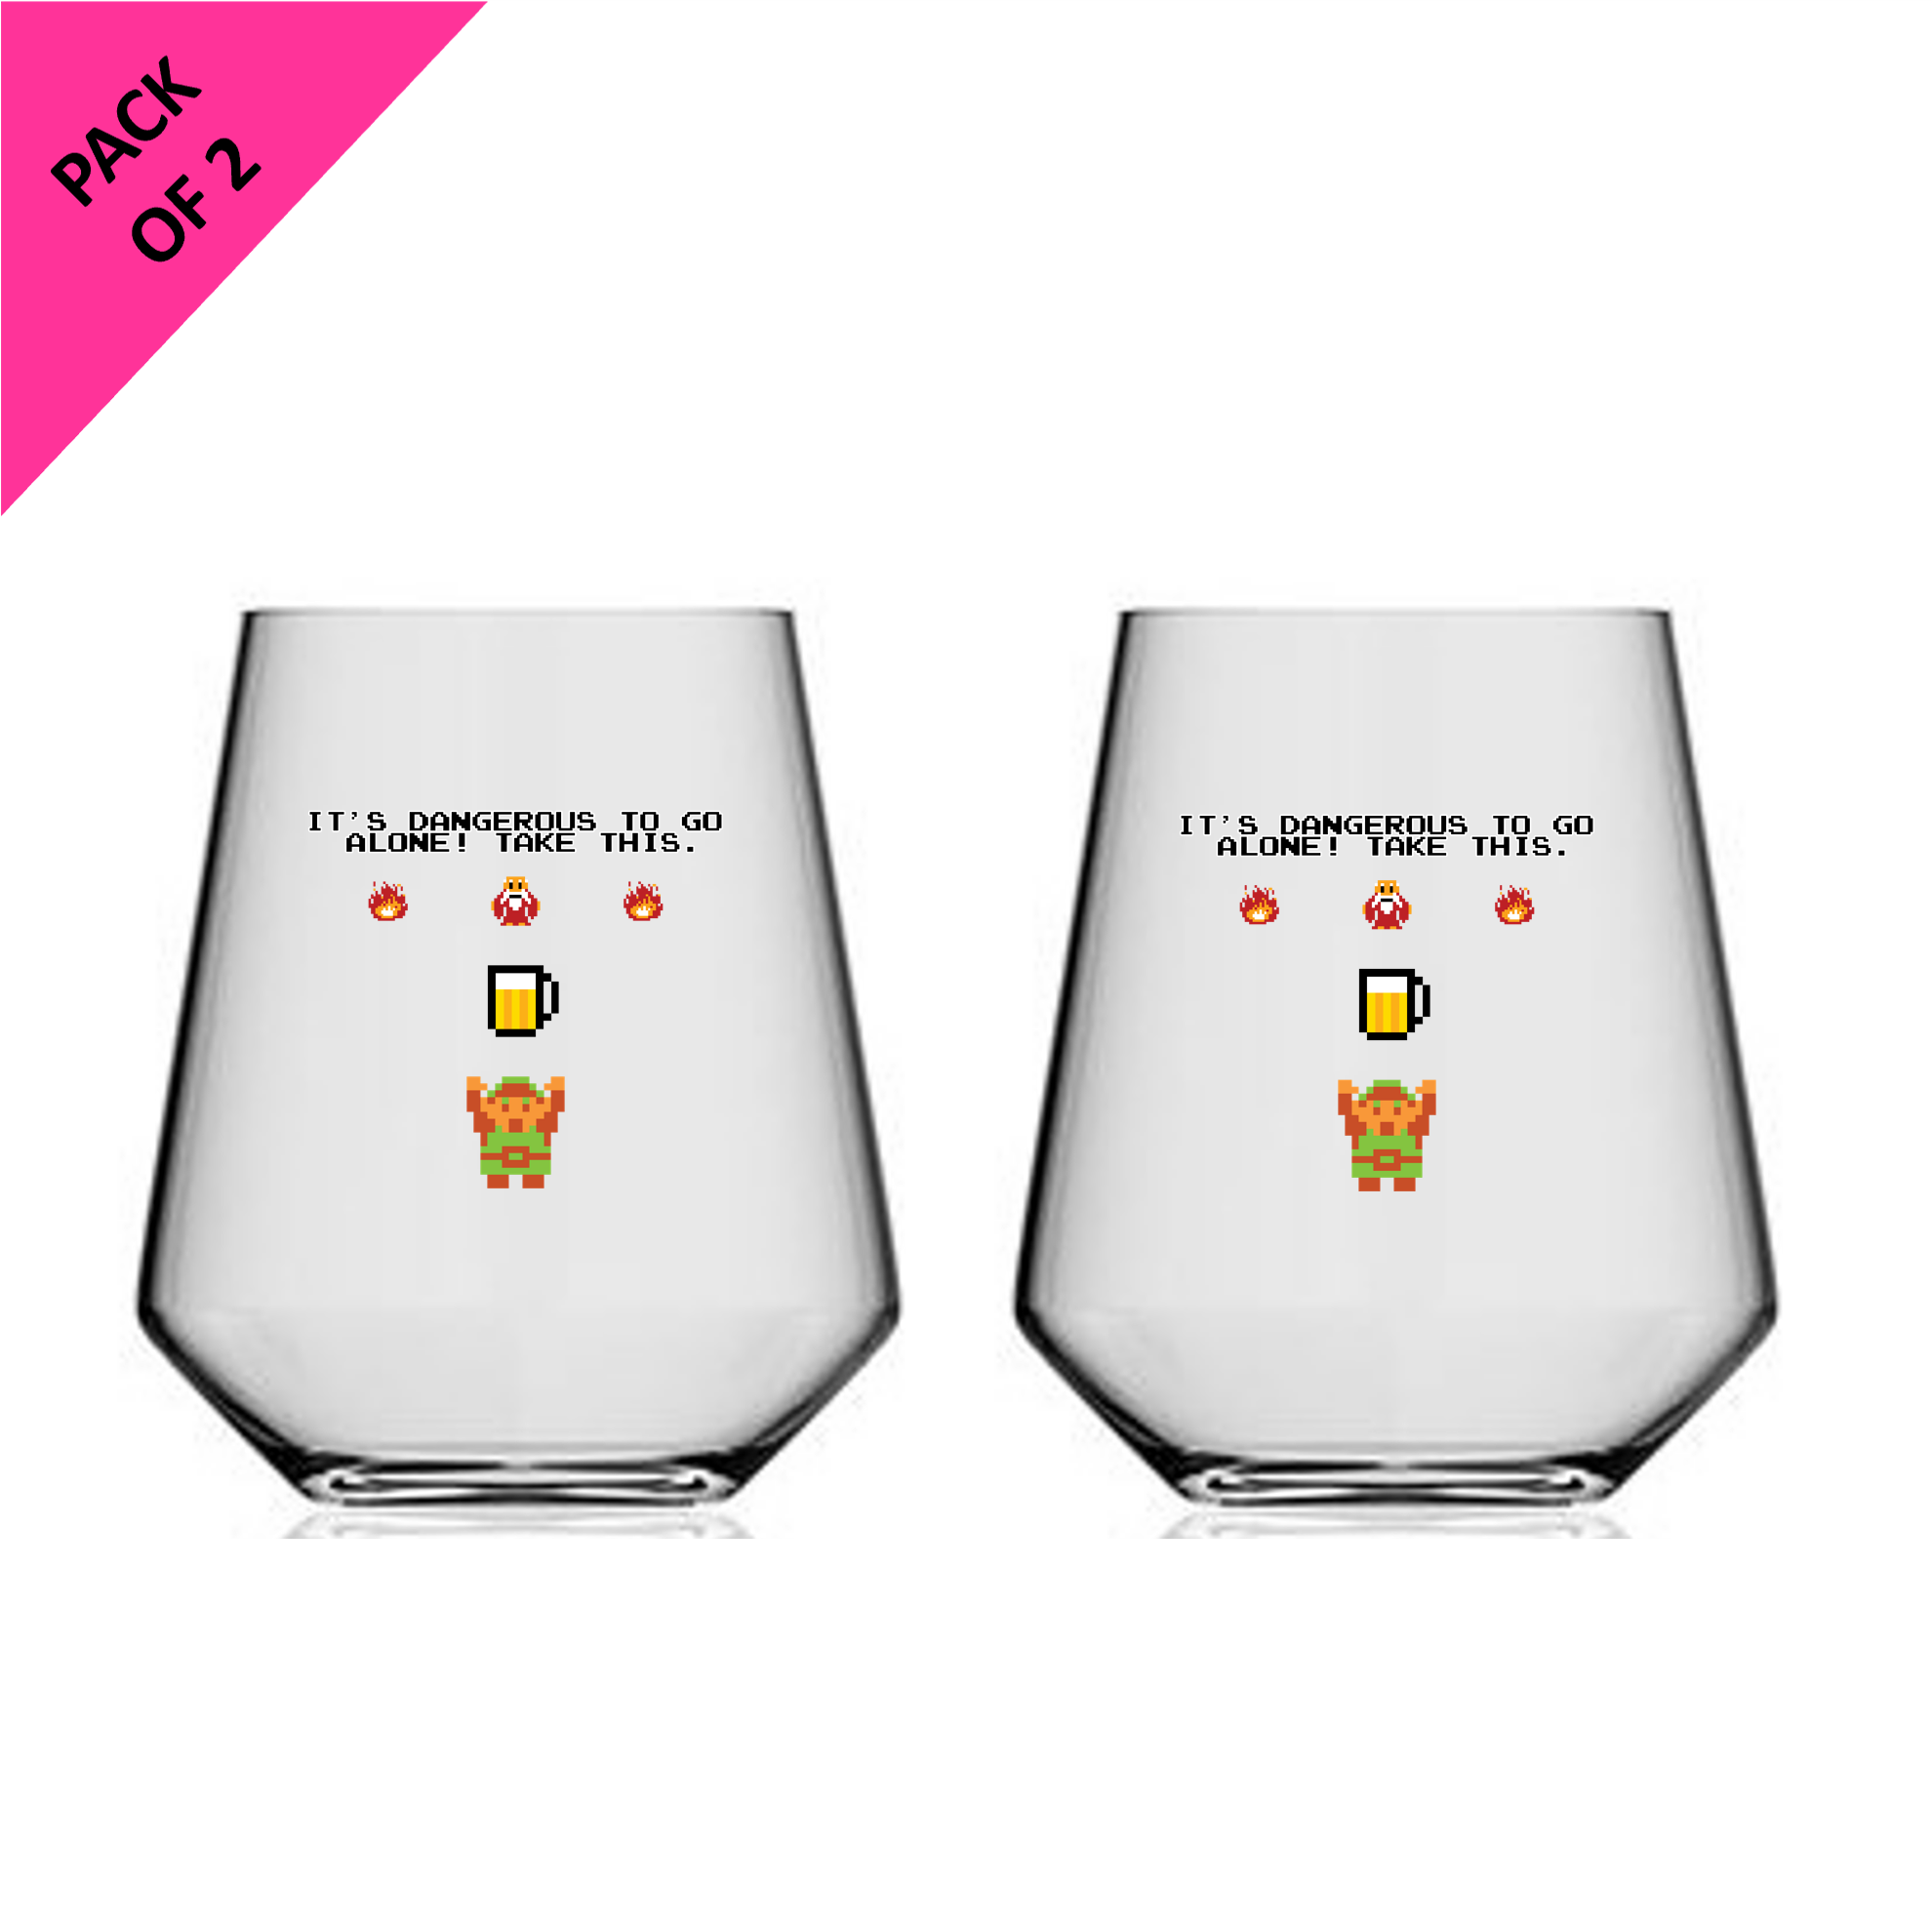 Single Product Image Pack of 2 x “It's Dangerous To Go Alone” Zelda Link 14oz glasses